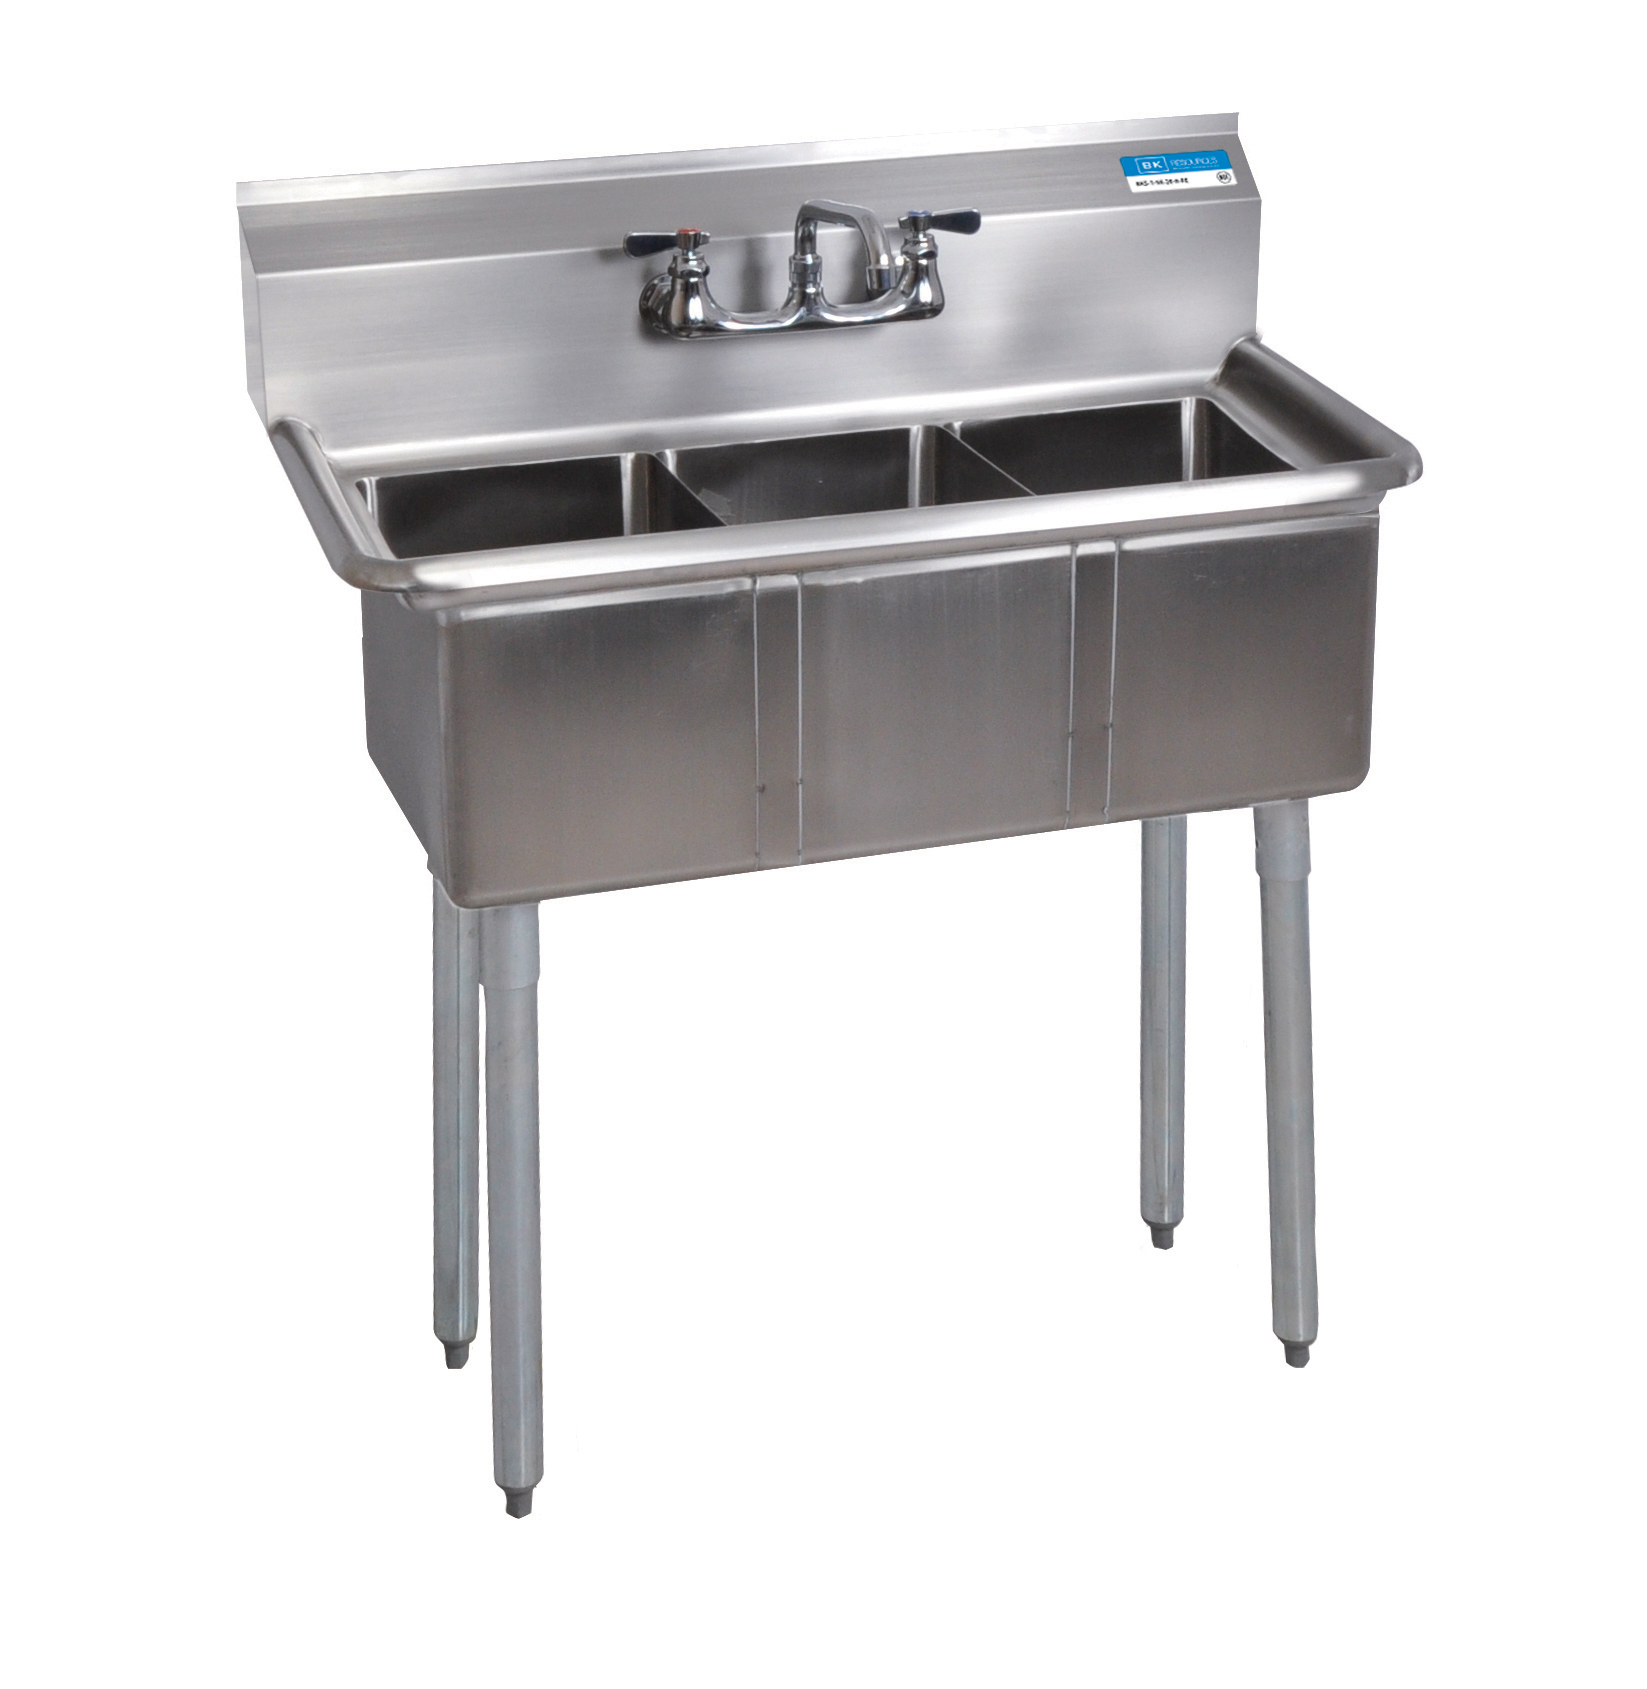 Bk Resources Bks 3 1014 10s 3 Compartment Sinks